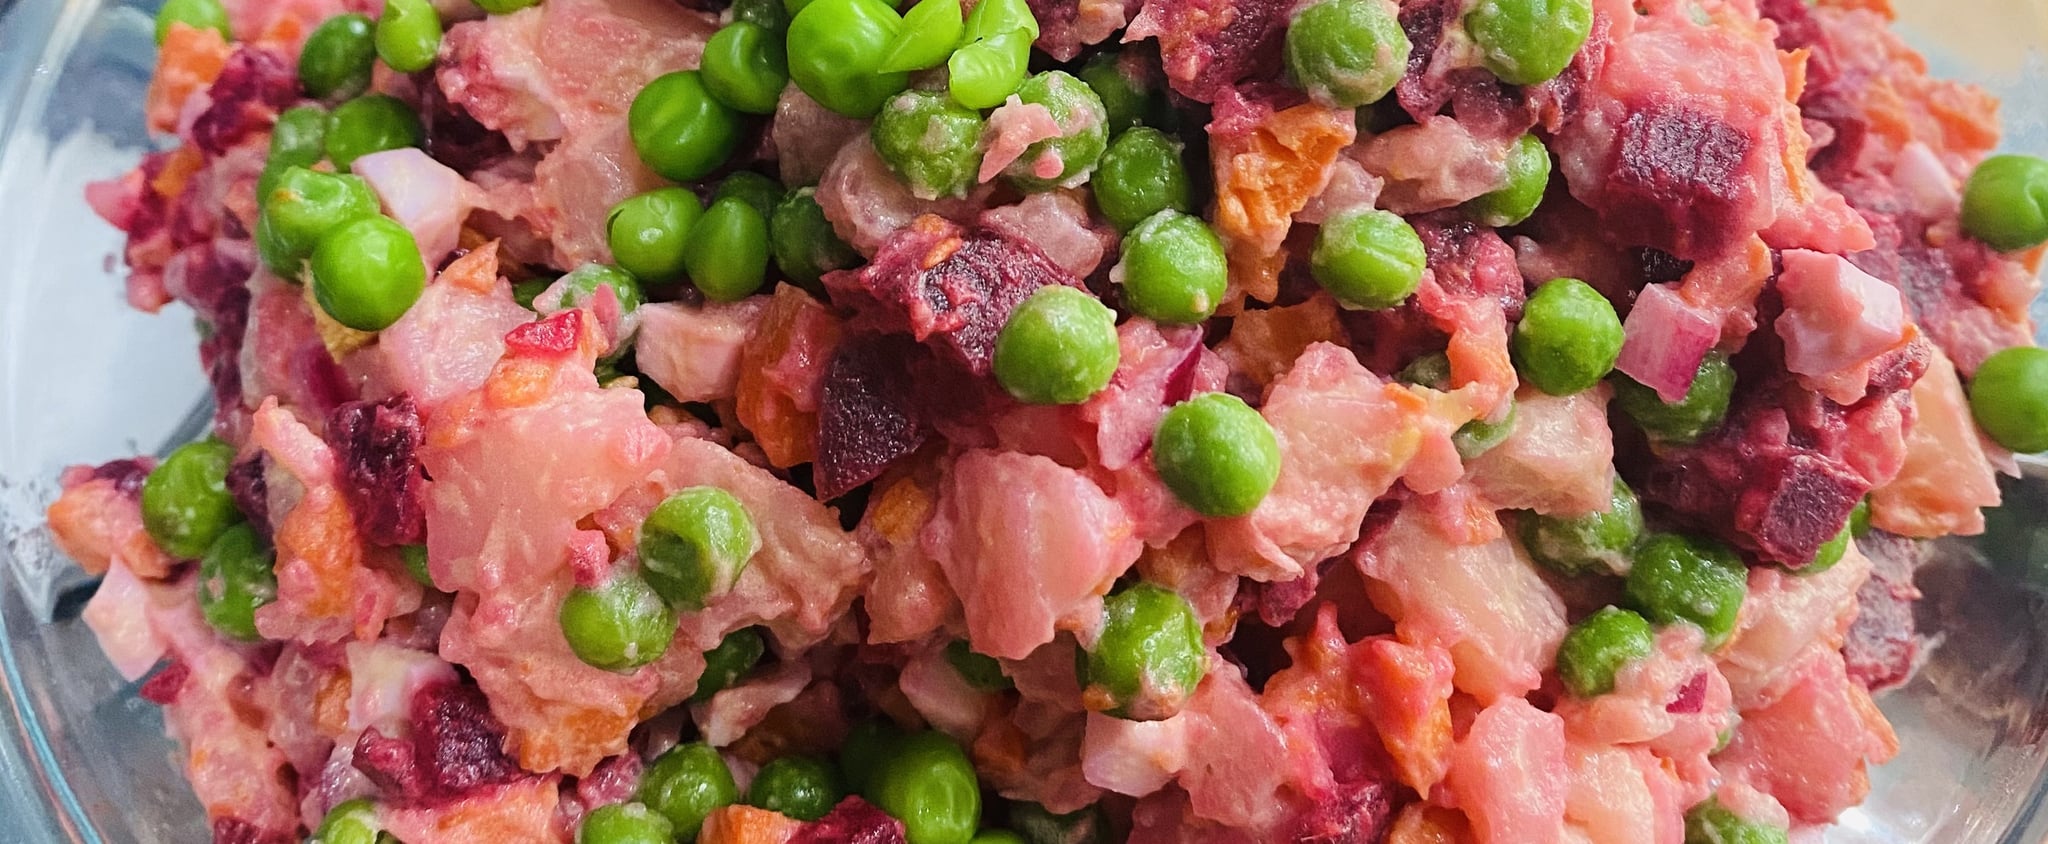 Make This Delicious Dominican Potato Salad Made With Beets